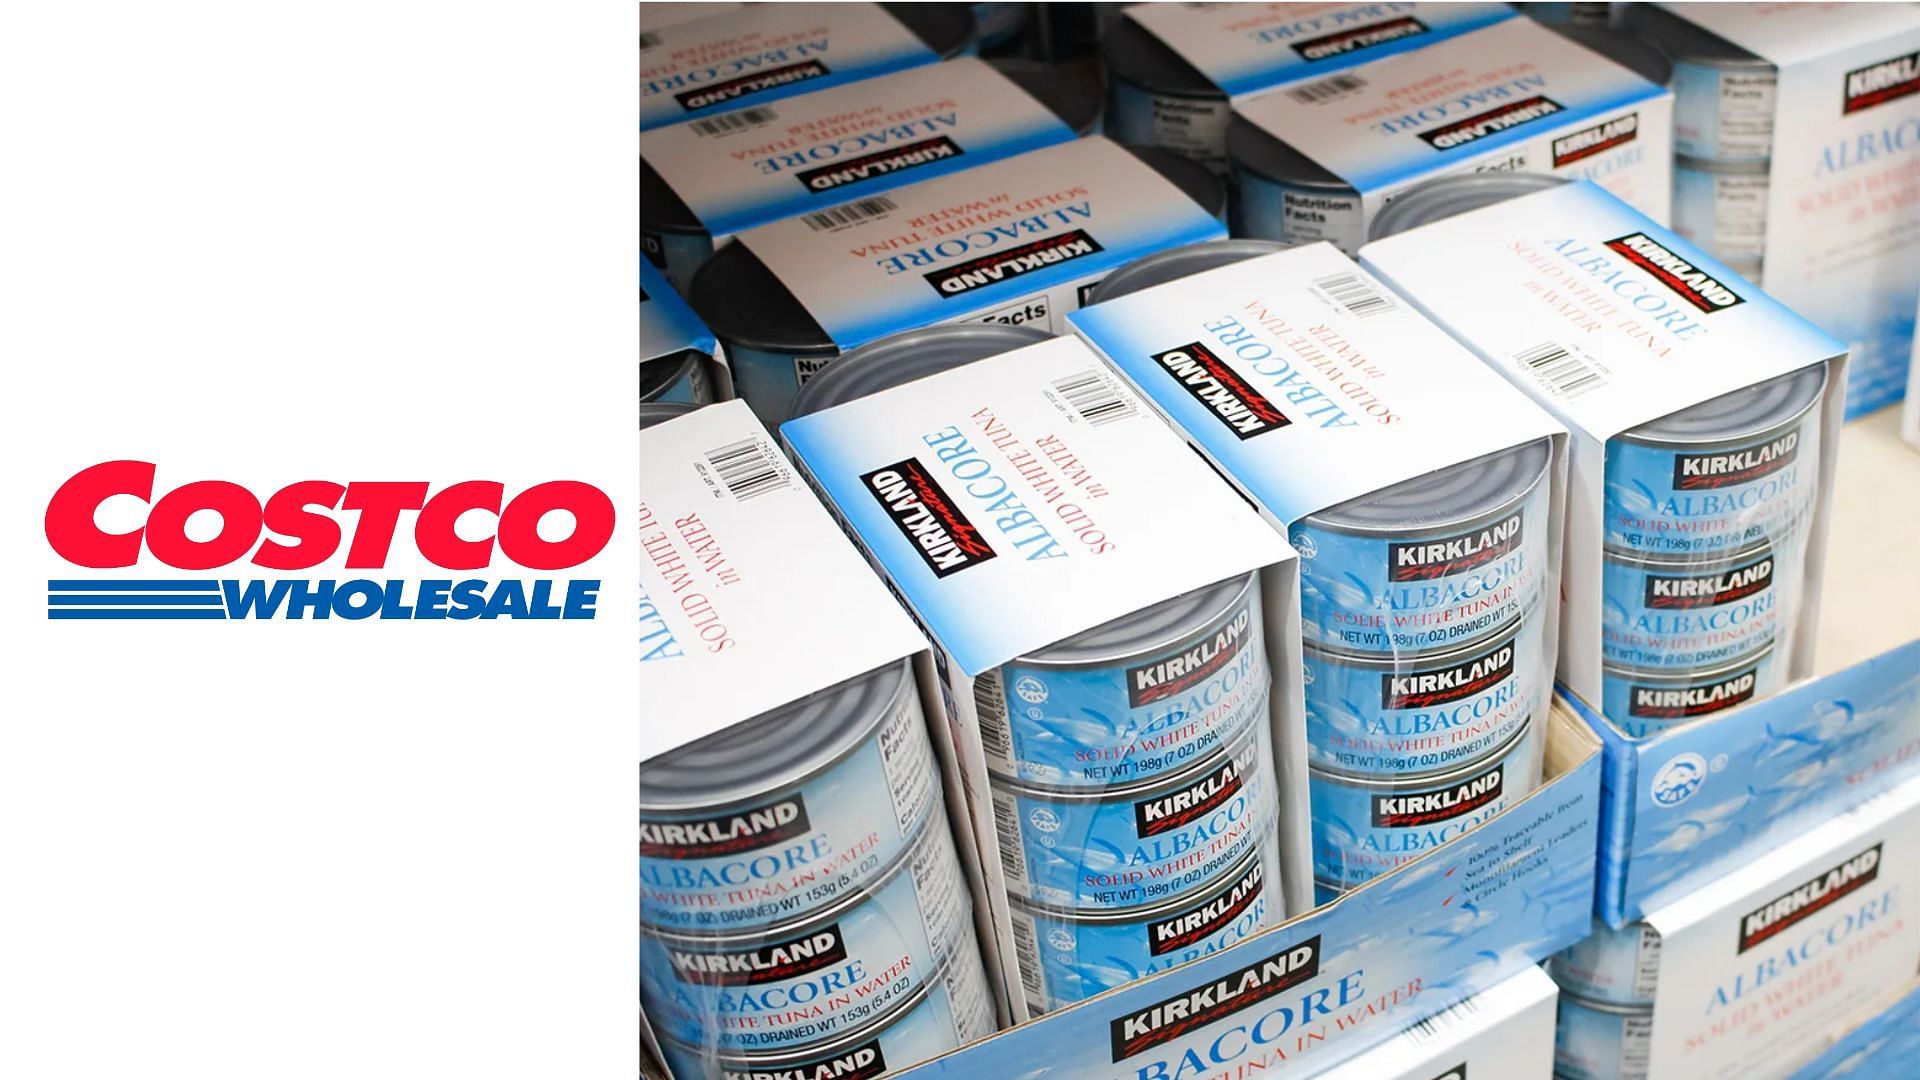 Costco sued for misleading customers with &quot;dolphin safe&quot; labels on its canned tuna products (Image via The Image Party/Shutterstock)